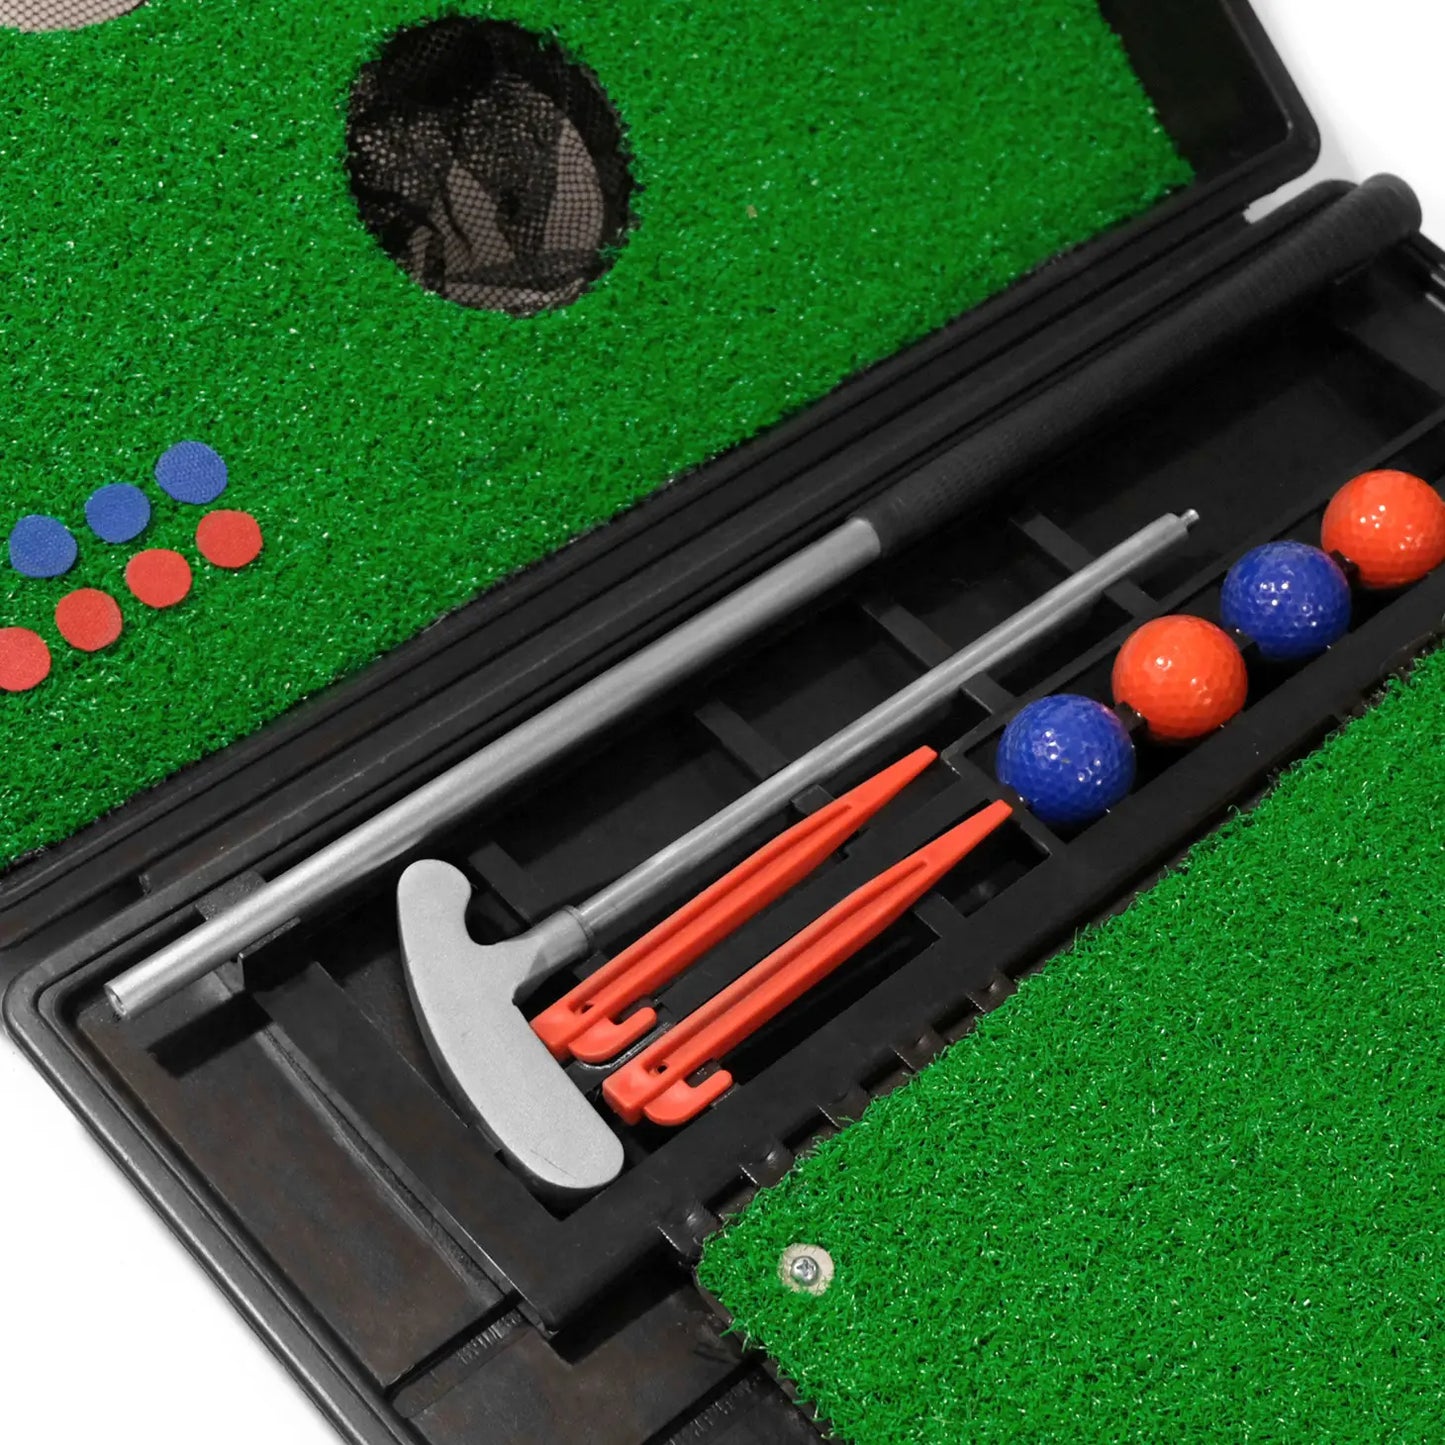 Yard Games - Putter Pong Putting Game with Putter and Golf Mat